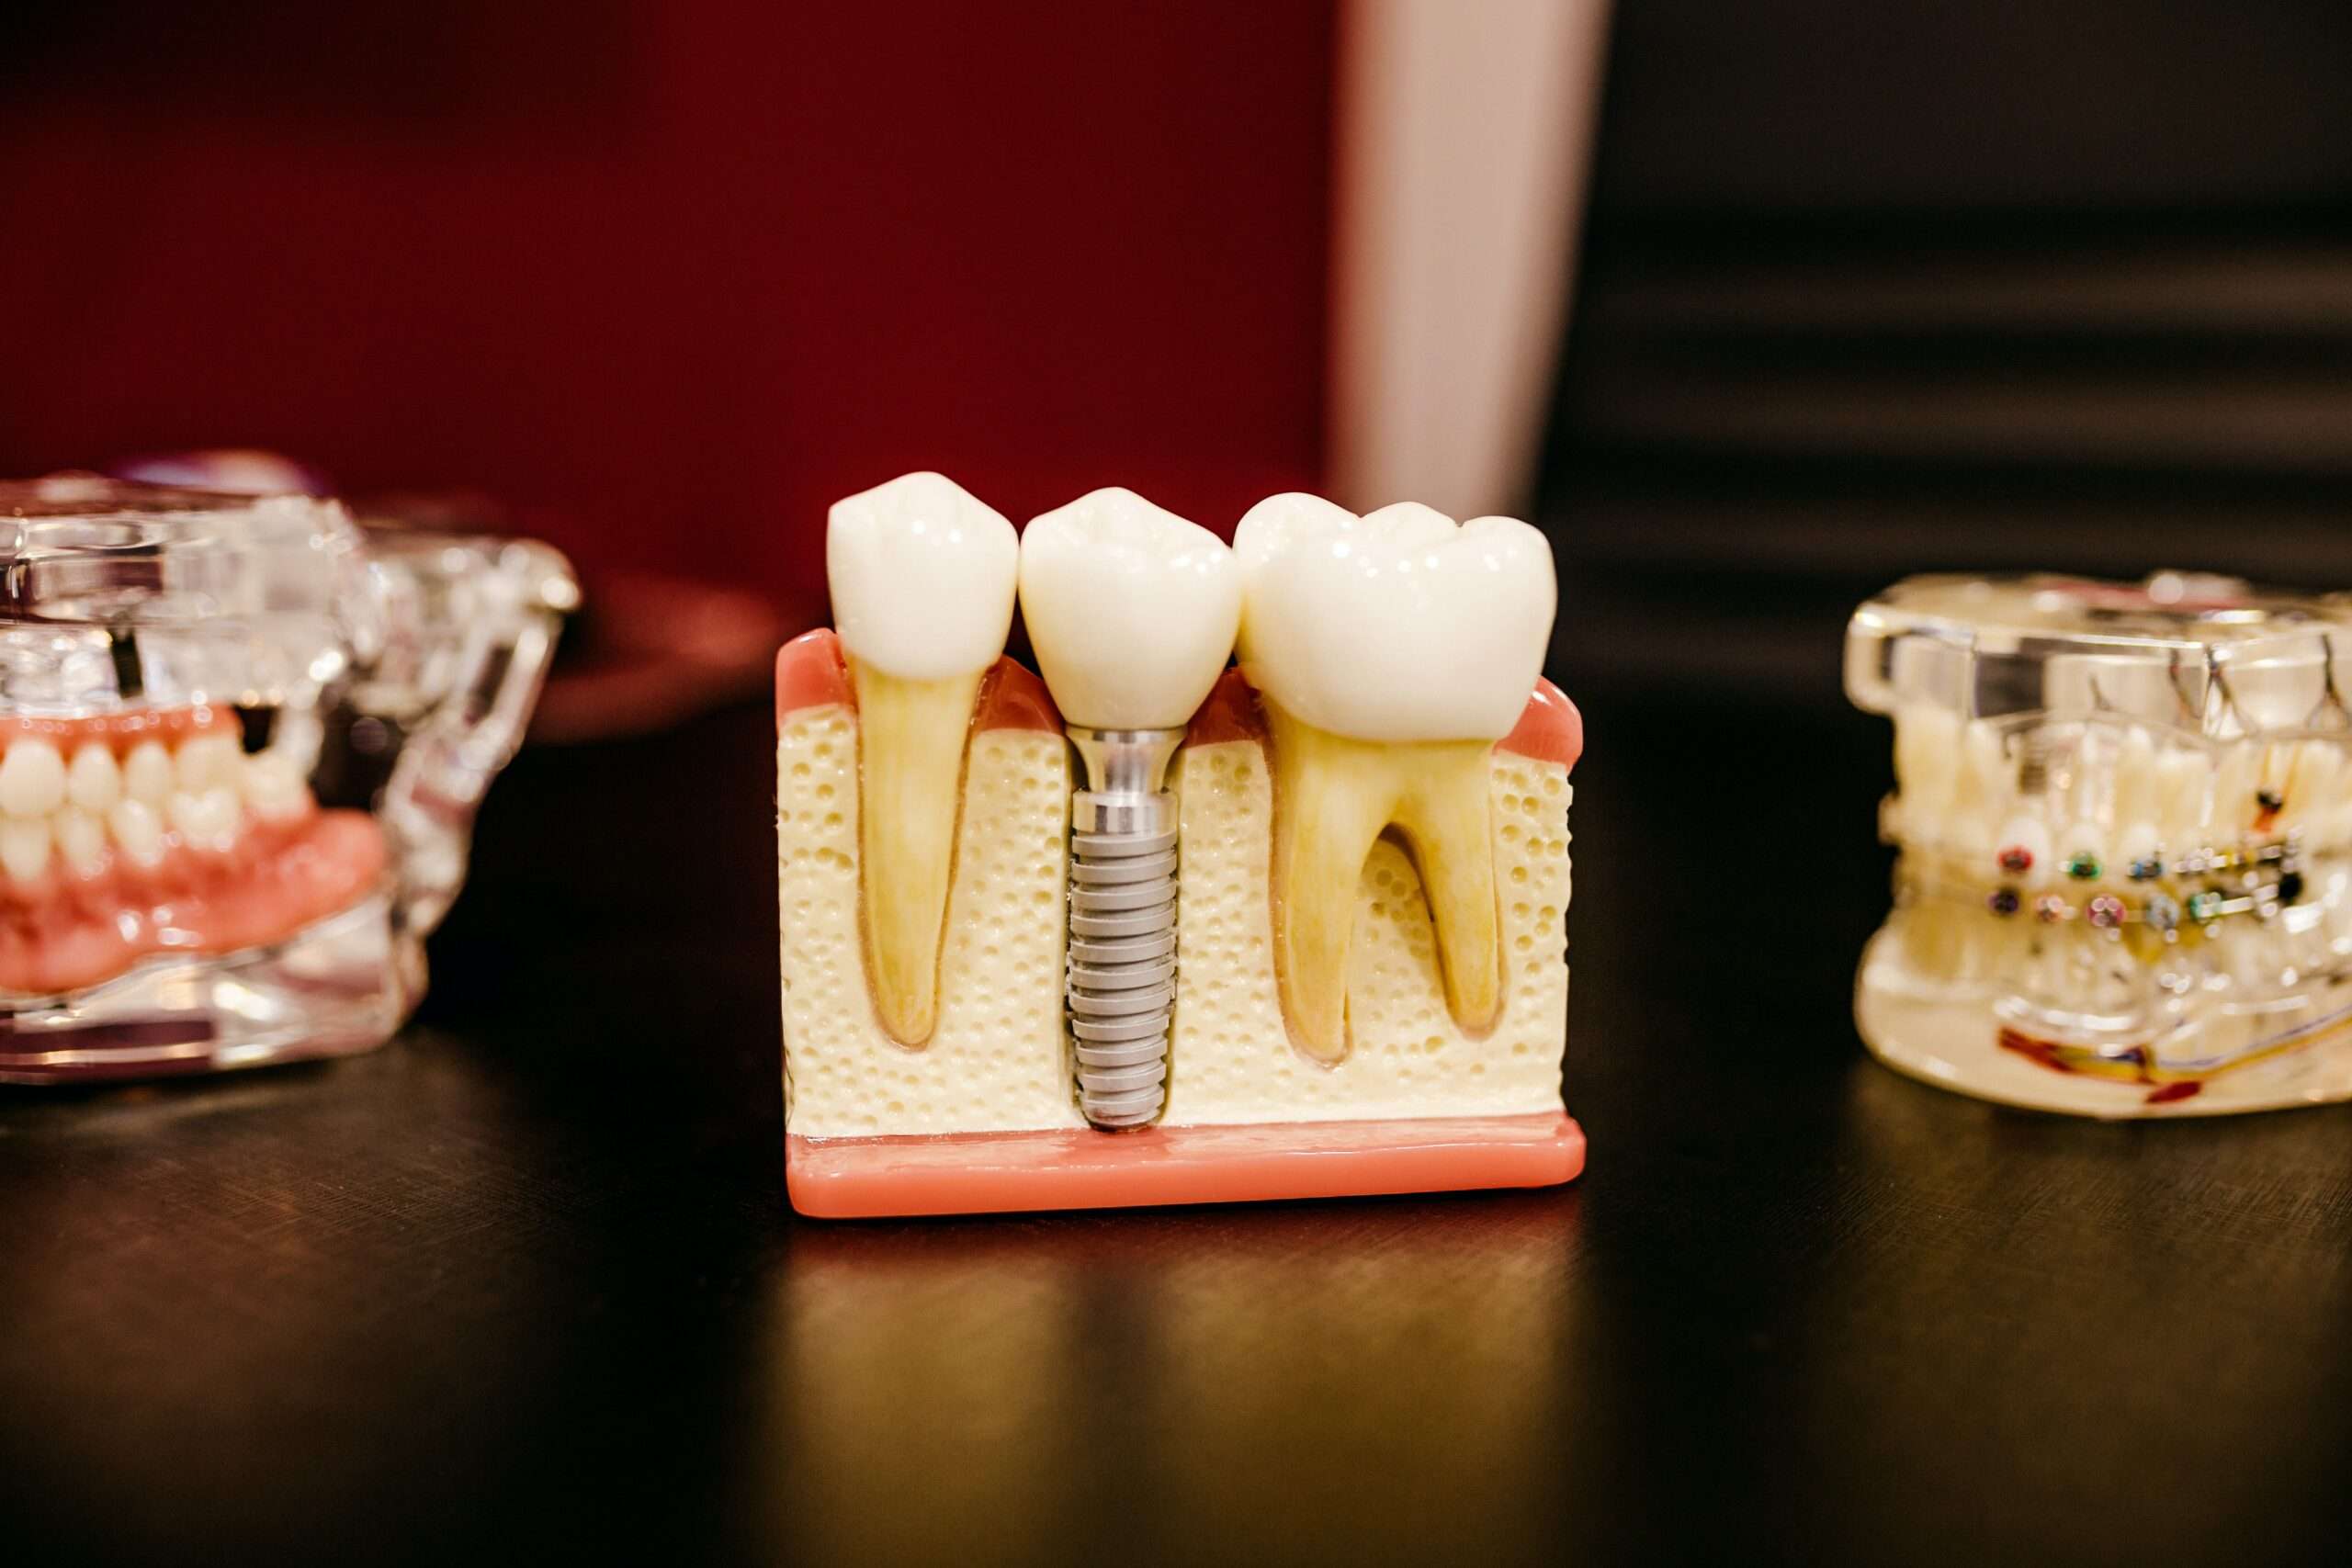 About Us - Model of a teeth on a table